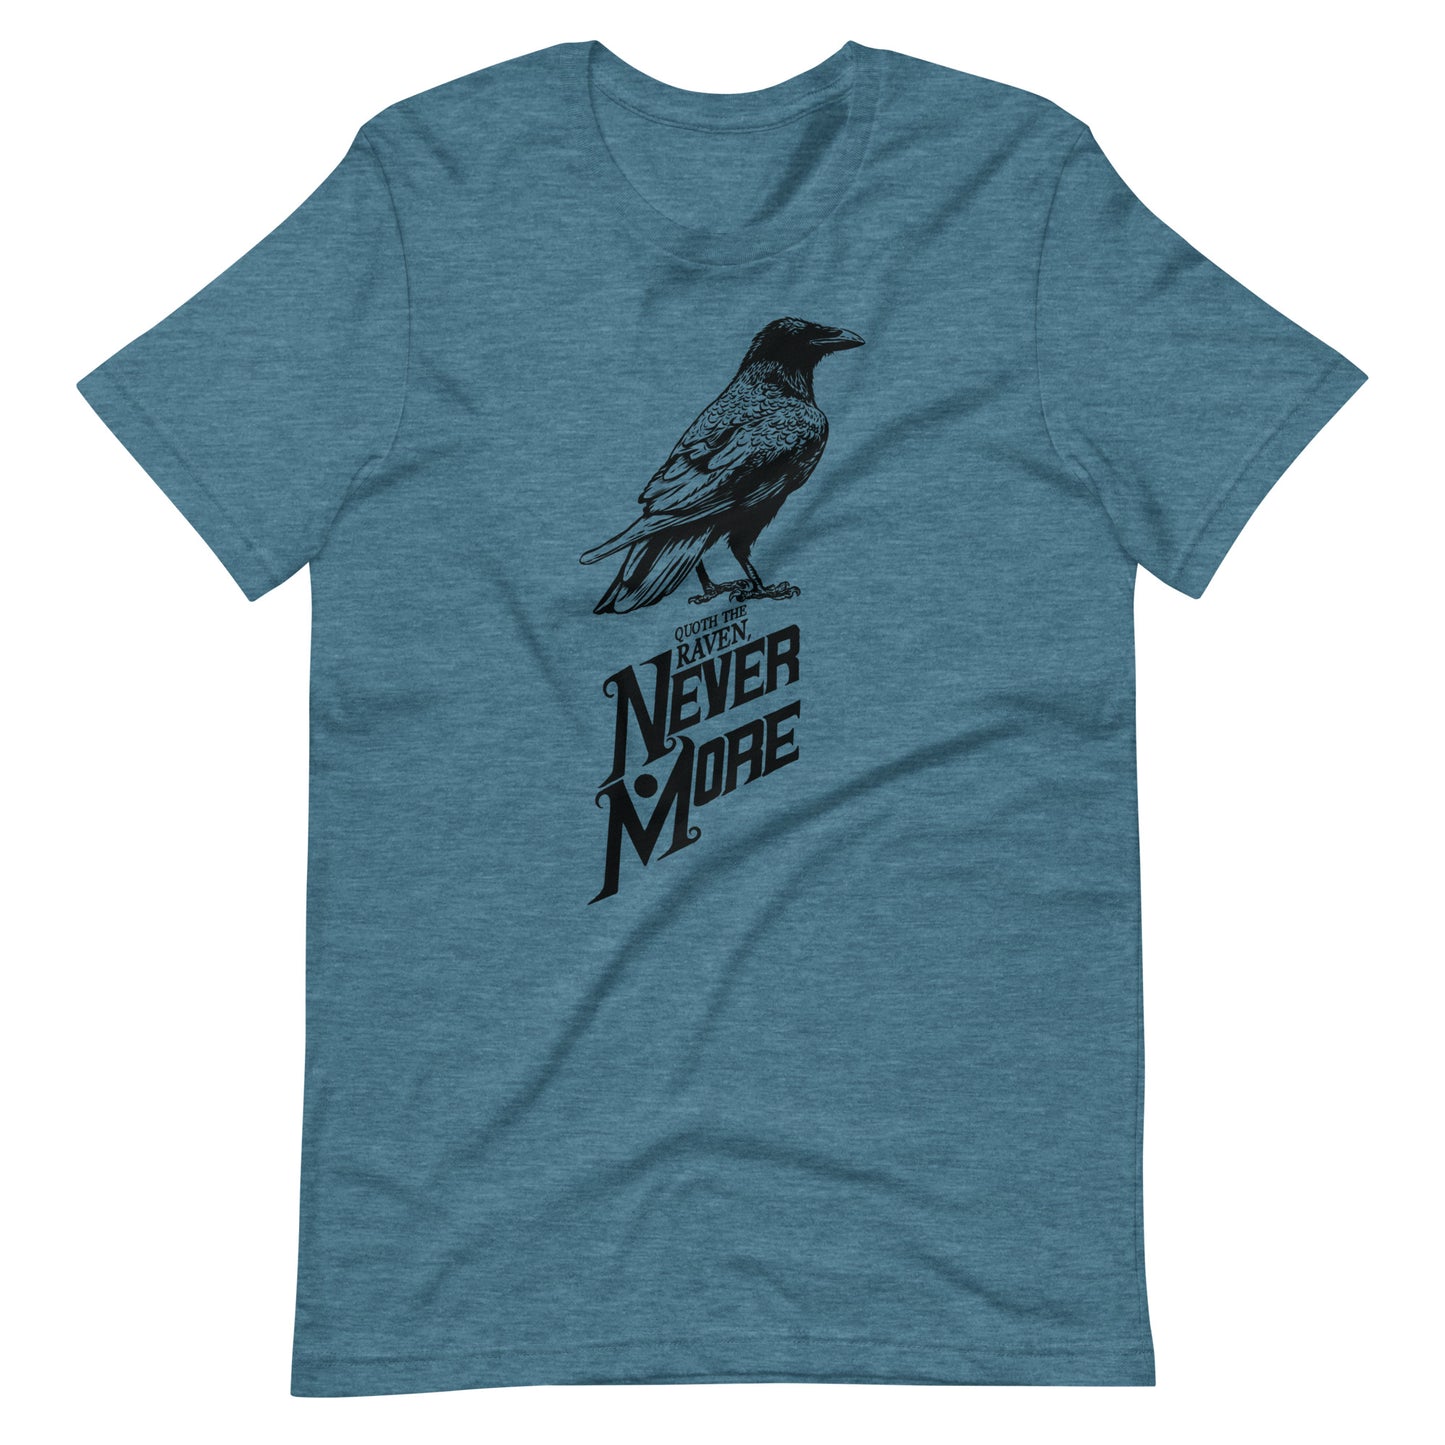 Quoth the Raven Nevermore - Men's t-shirt - Heather Deep Teal Front